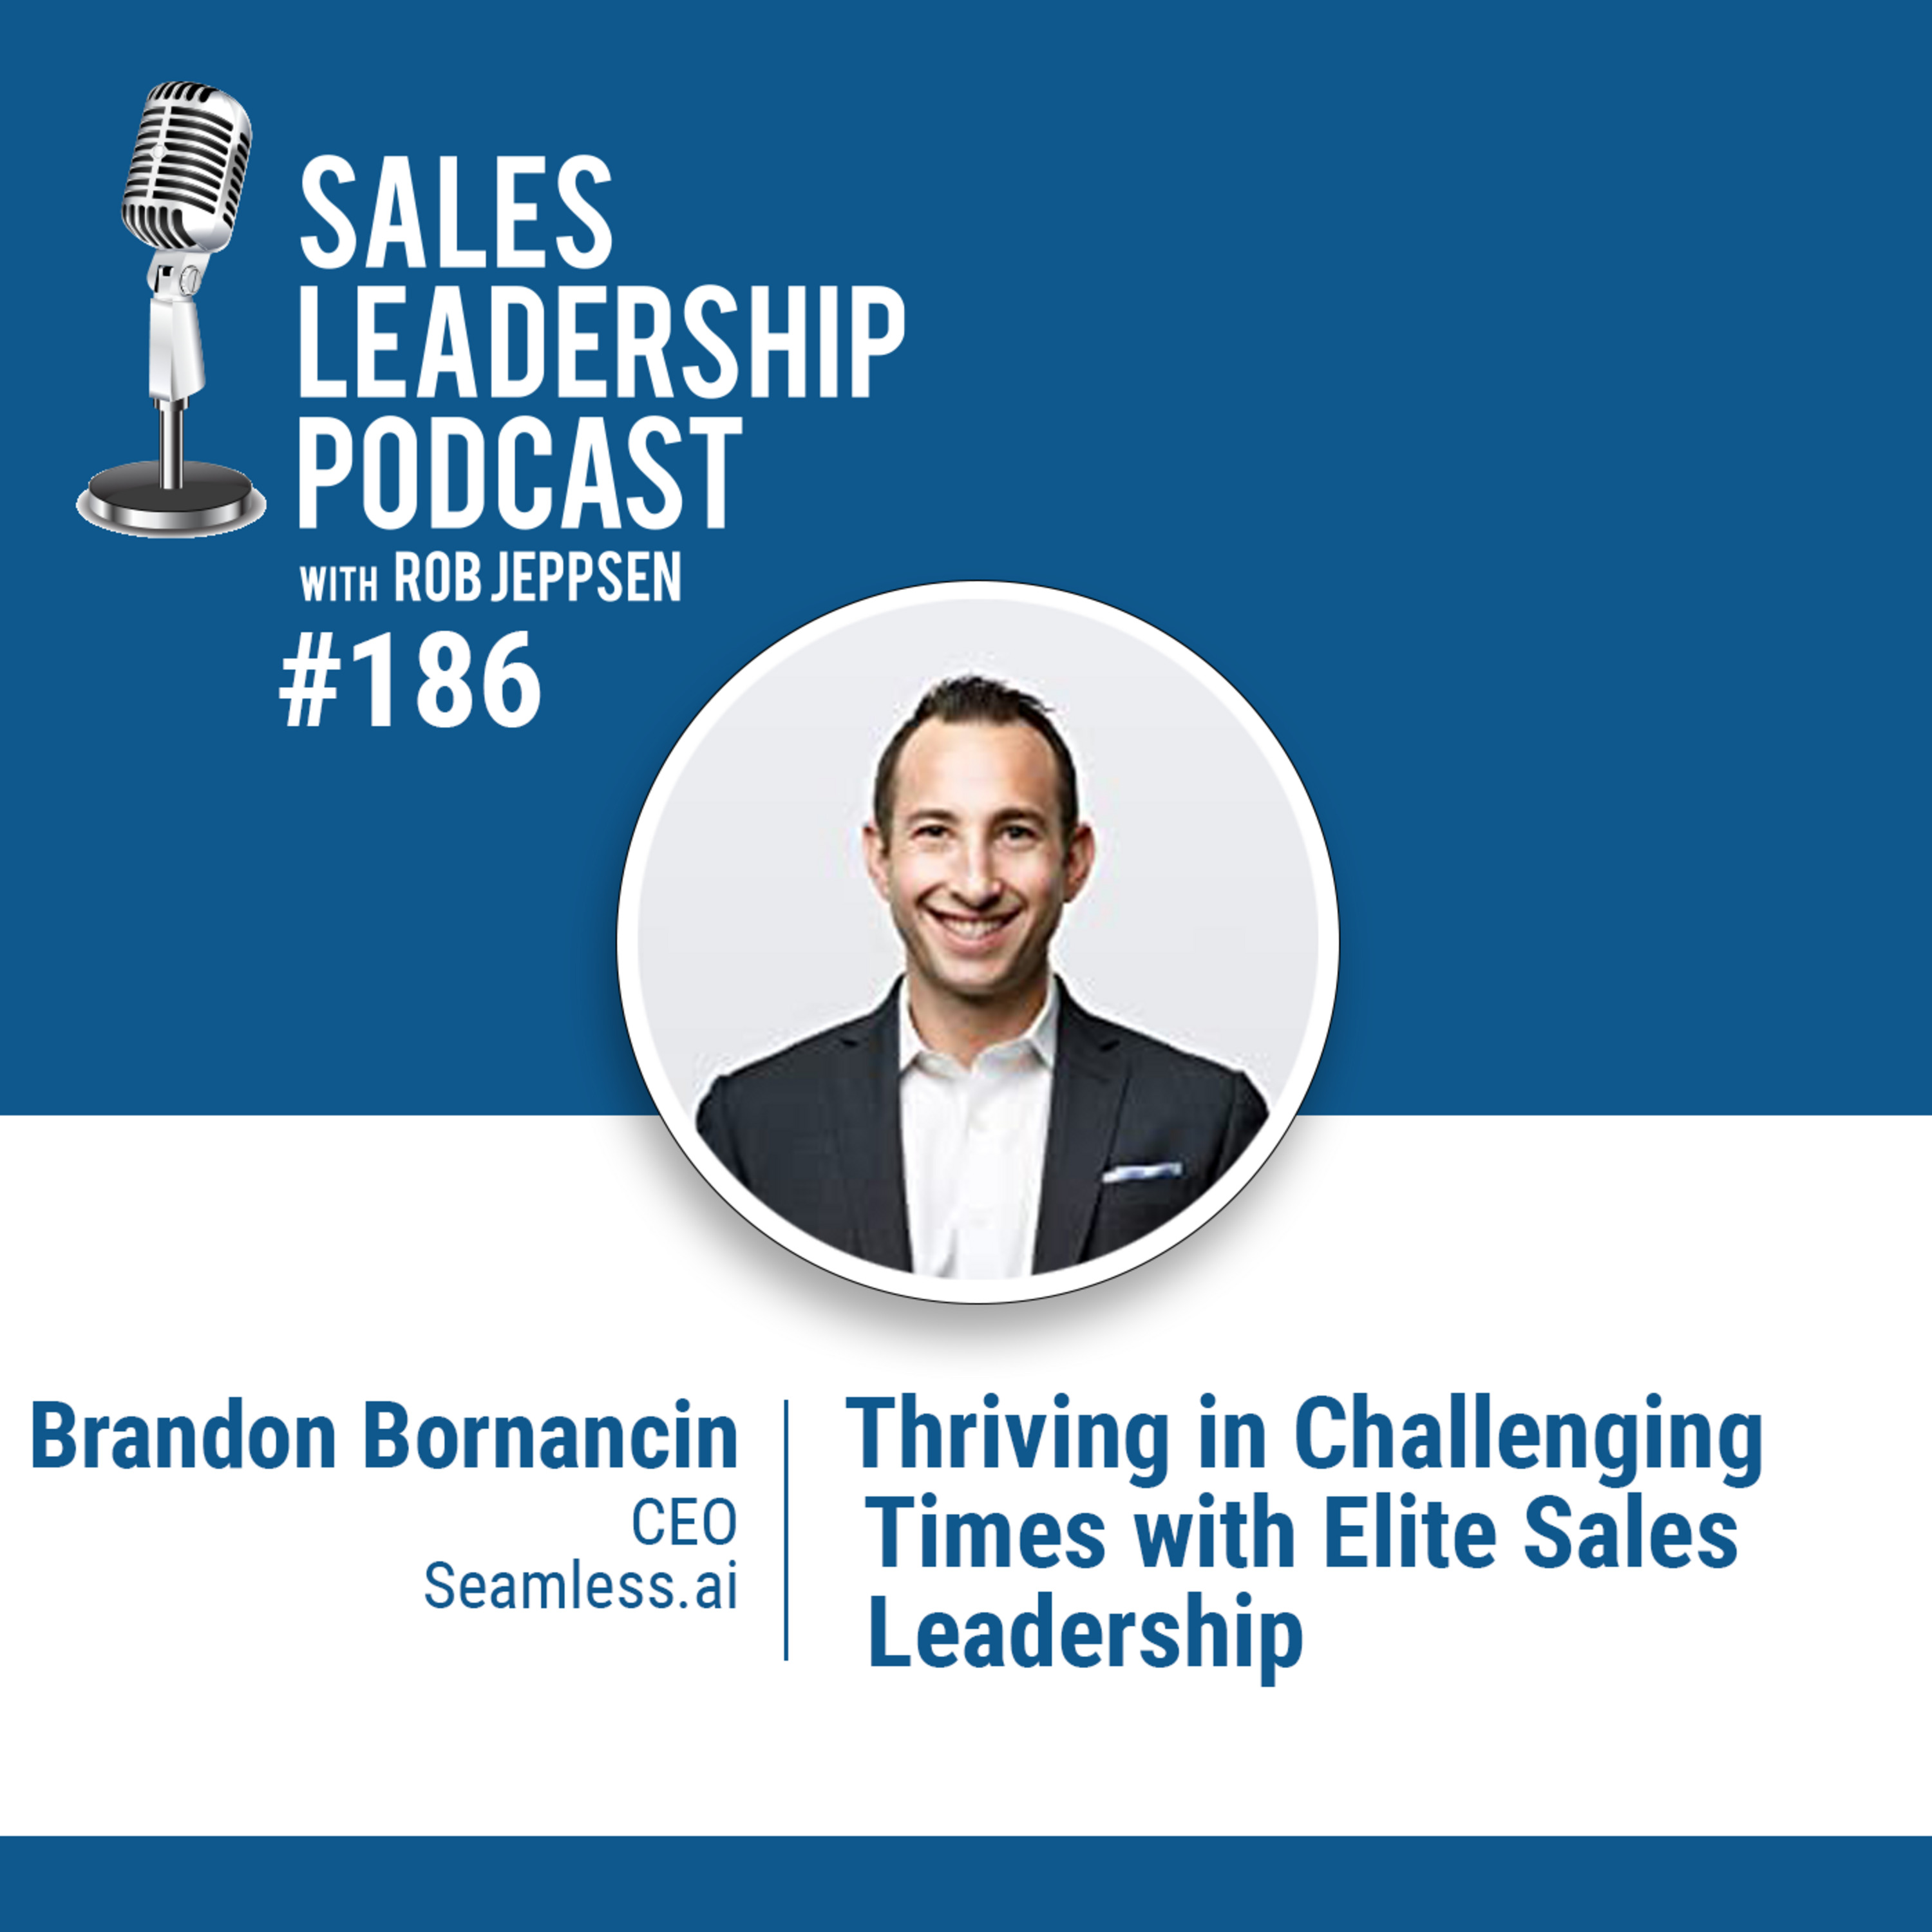 Episode 187: #186: Brandon Bornancin of Seamless.ai — Thriving in Challenging Times with Elite Sales Leadership